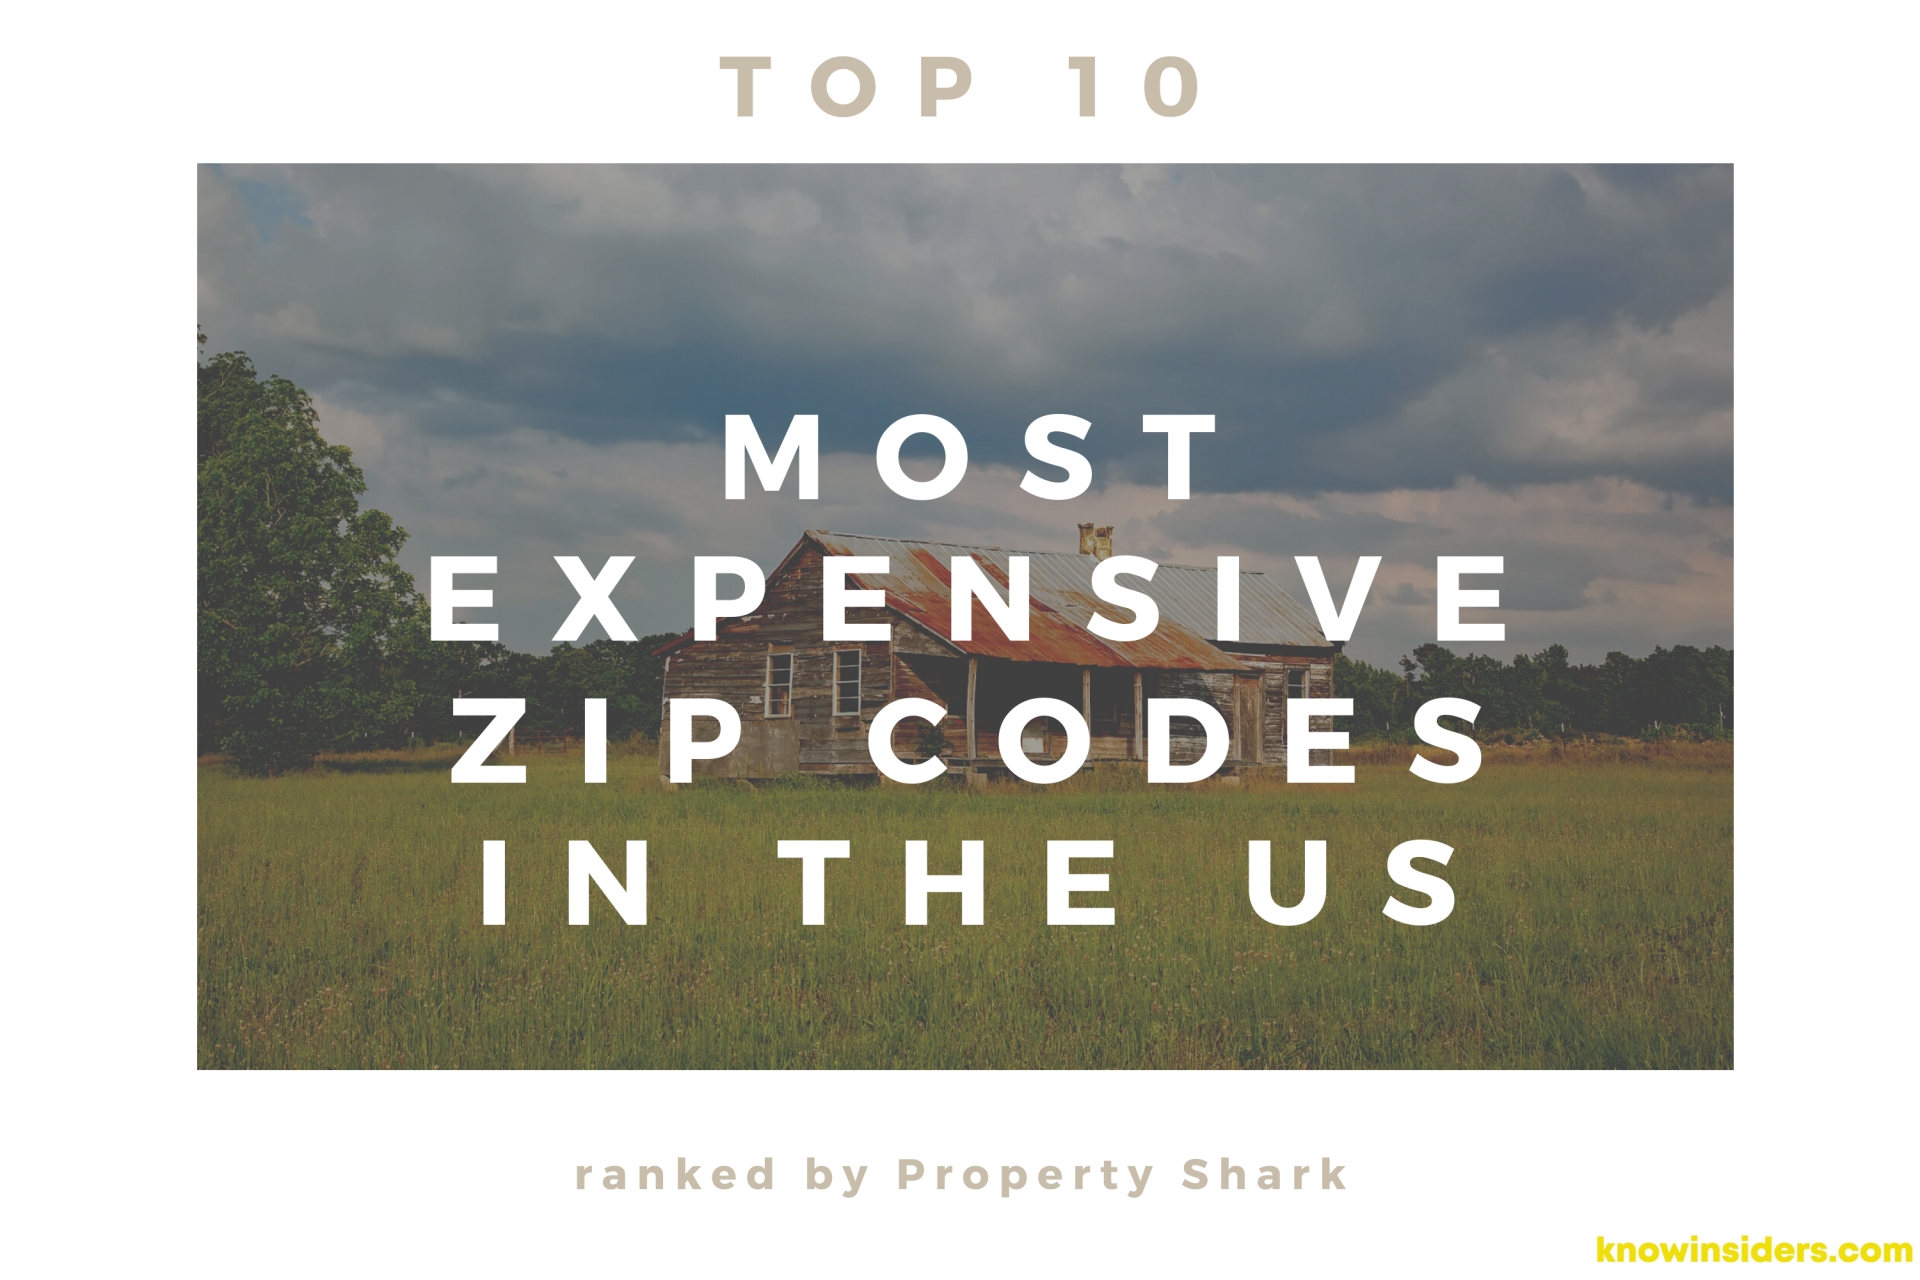 Top 10 Most Expensive Zip Codes In America: Home Price Skyrocketed